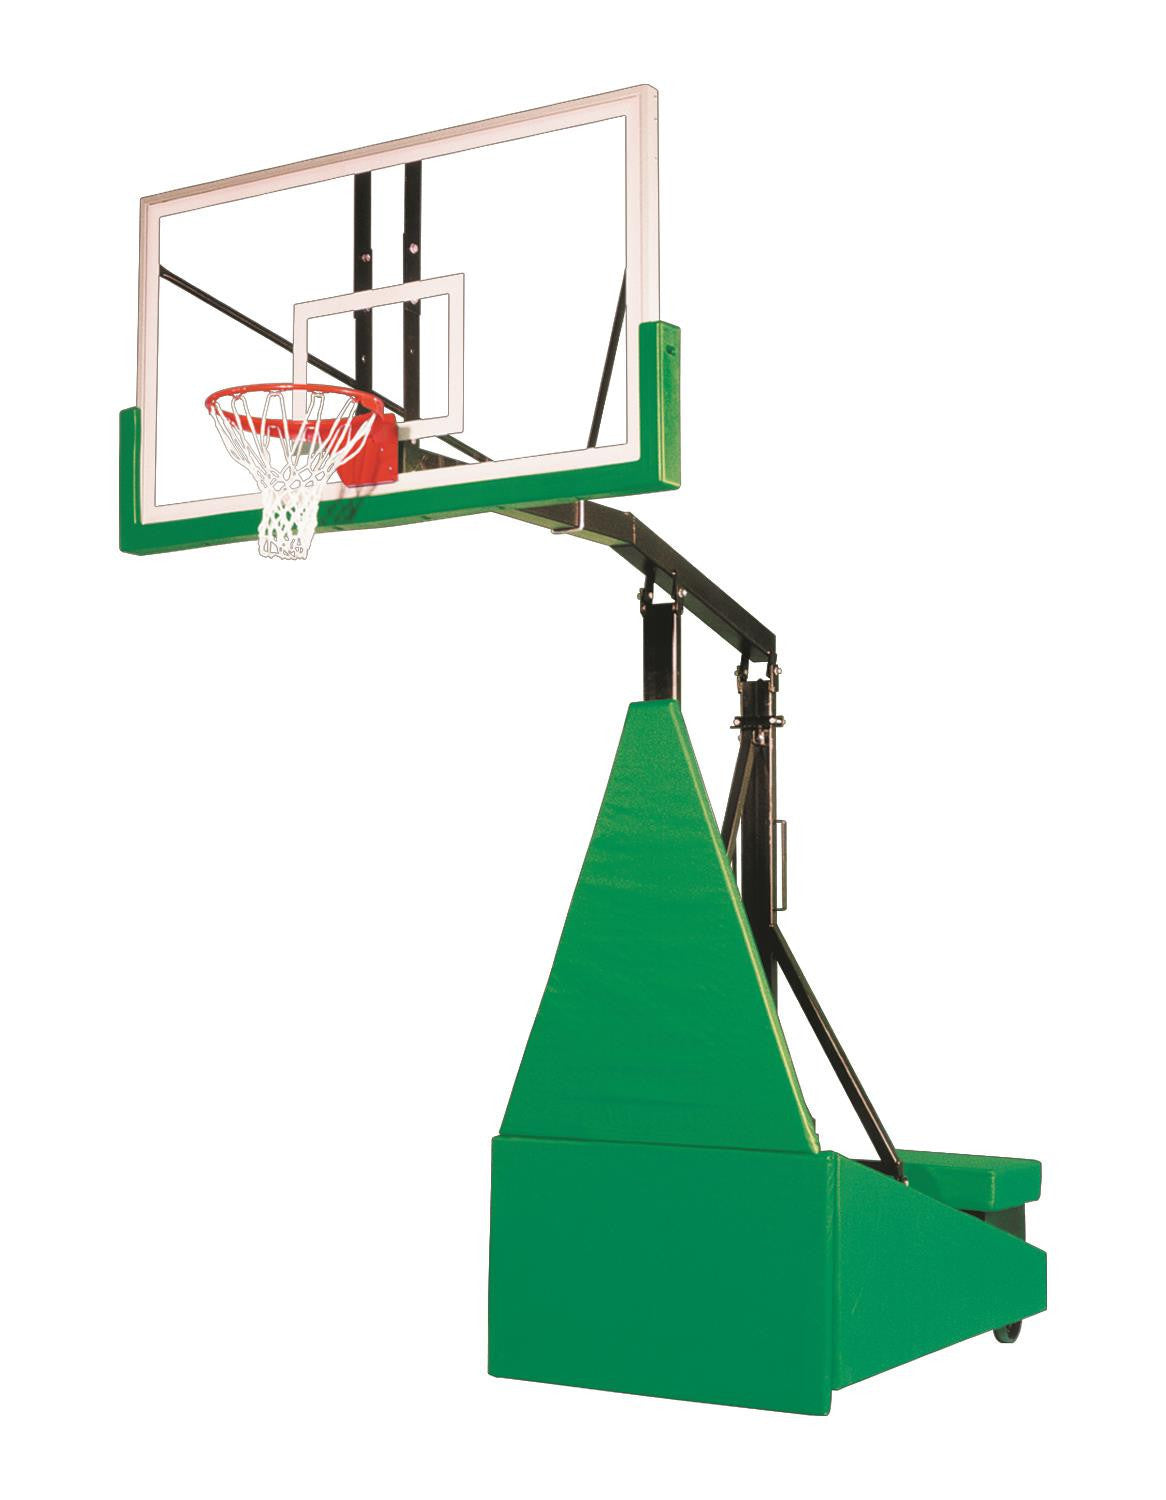 First Team Storm Arena Portable Adjustable Basketball Hoop 72 inch Tempered Glass